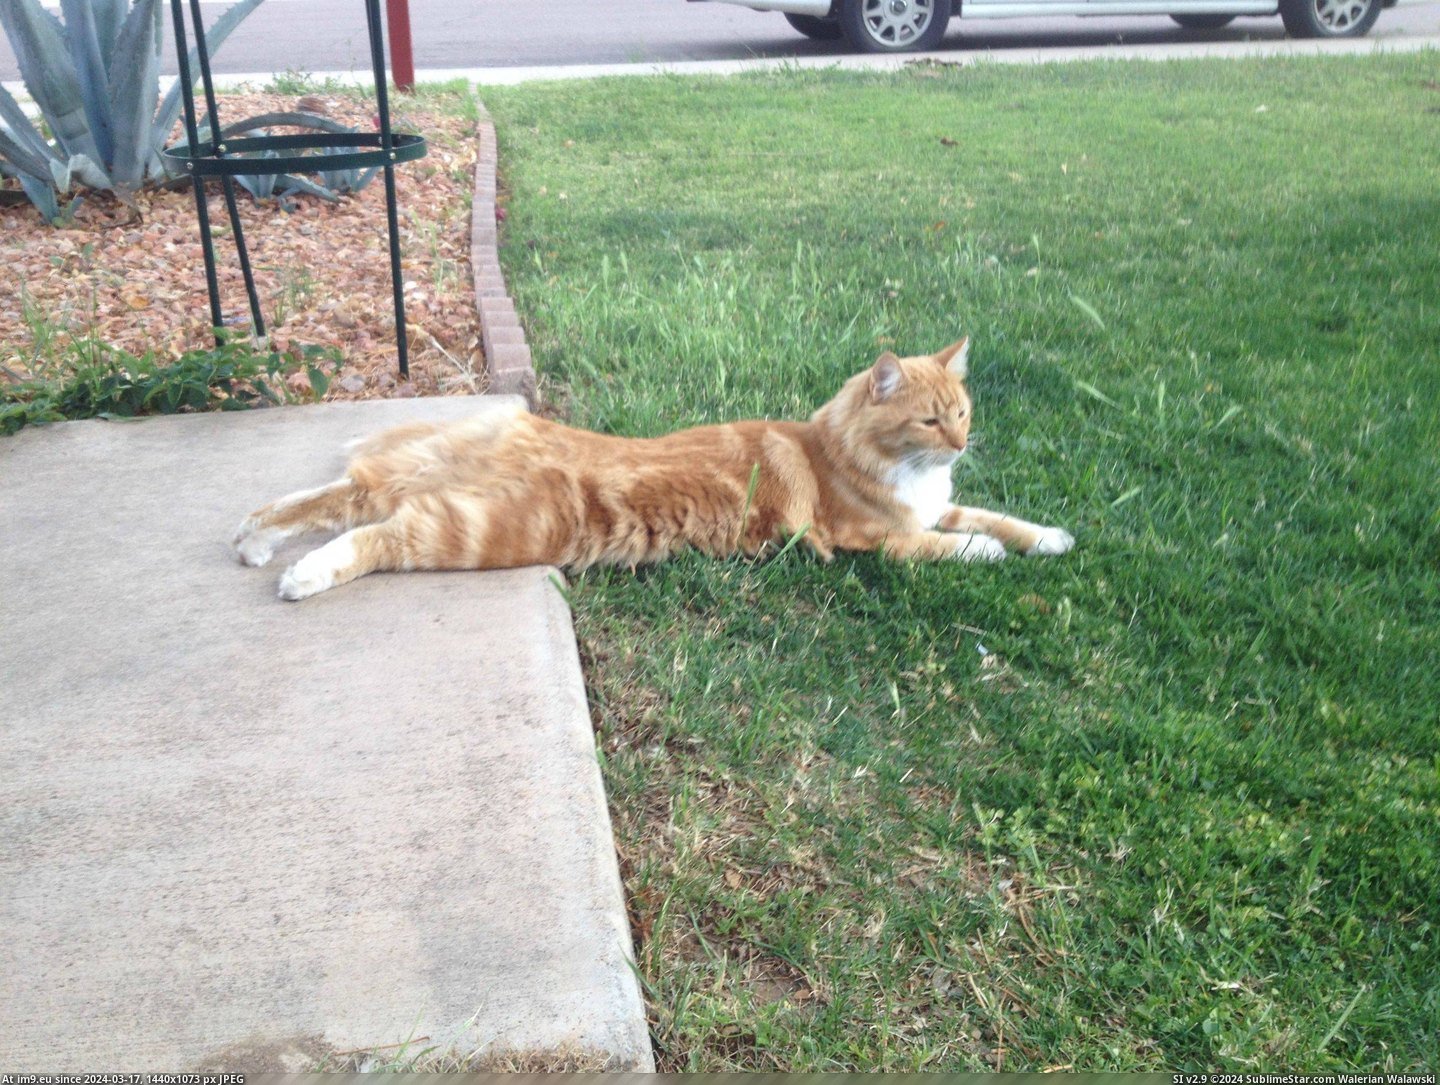 #Cats #Missed #Comfy #Grasshopper #Lunged #Sitting #Sidewalk [Cats] sitting on sidewalk, lunged at grasshopper...missed... seems comfy Pic. (Image of album My r/CATS favs))